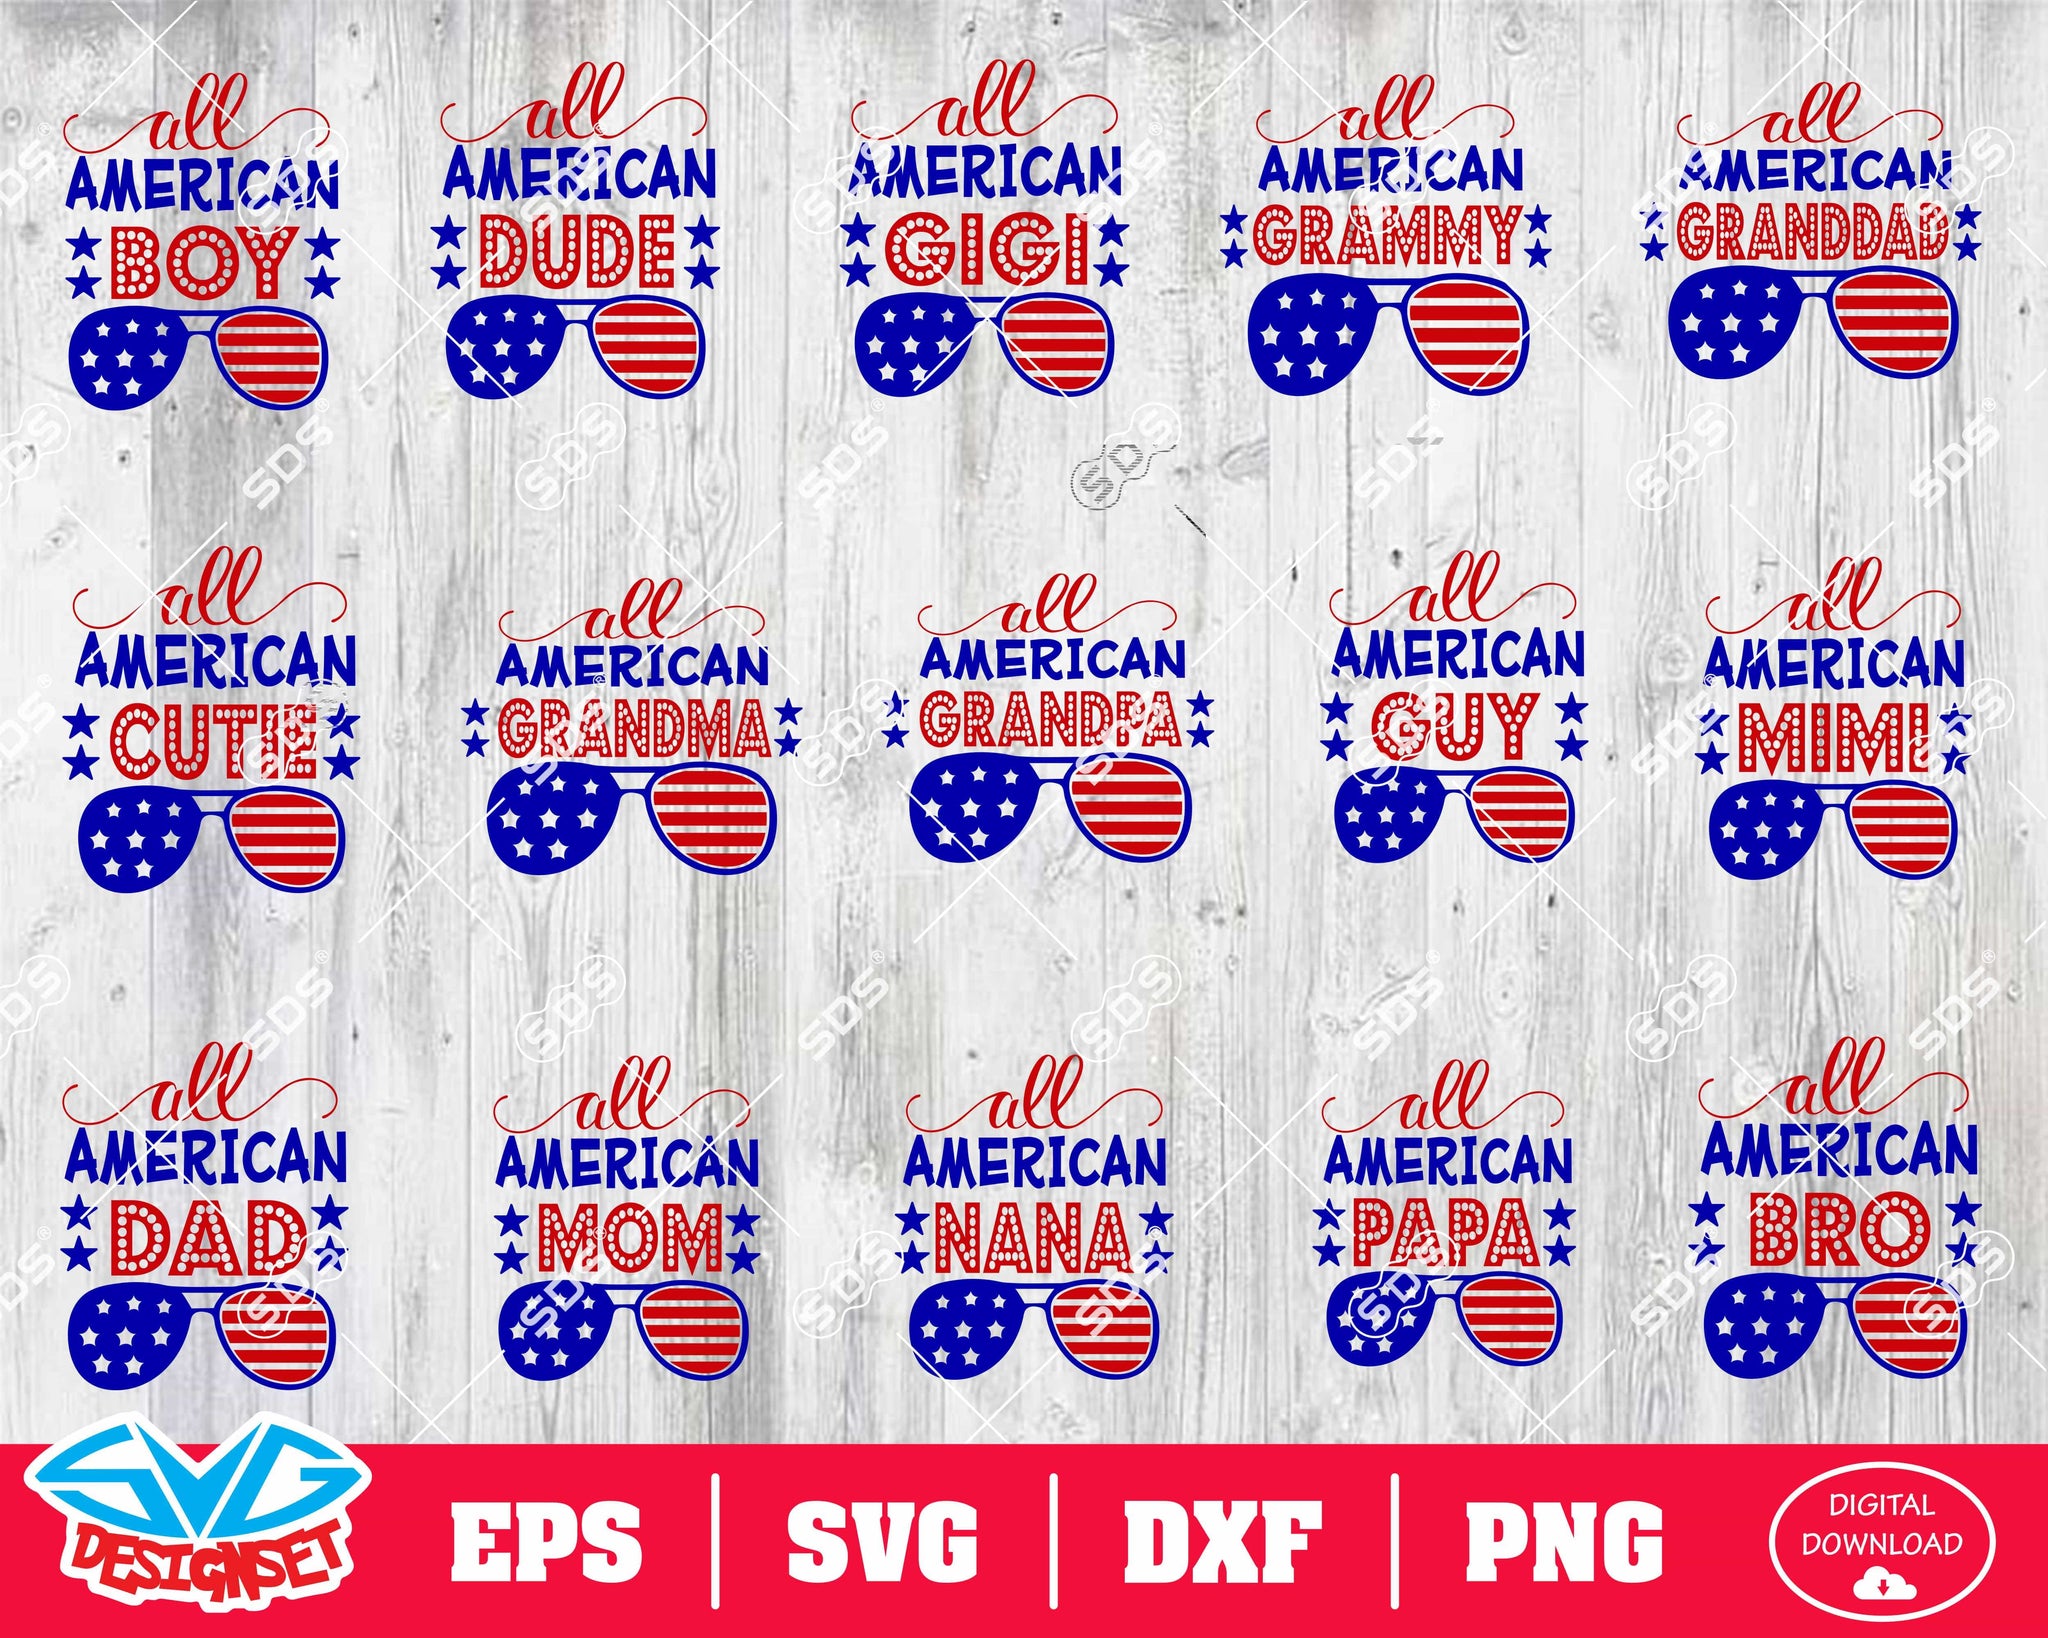 Fourth of July Svg, Dxf, Eps, Png, Clipart, Silhouette and Cutfiles #5 - SVGDesignSets